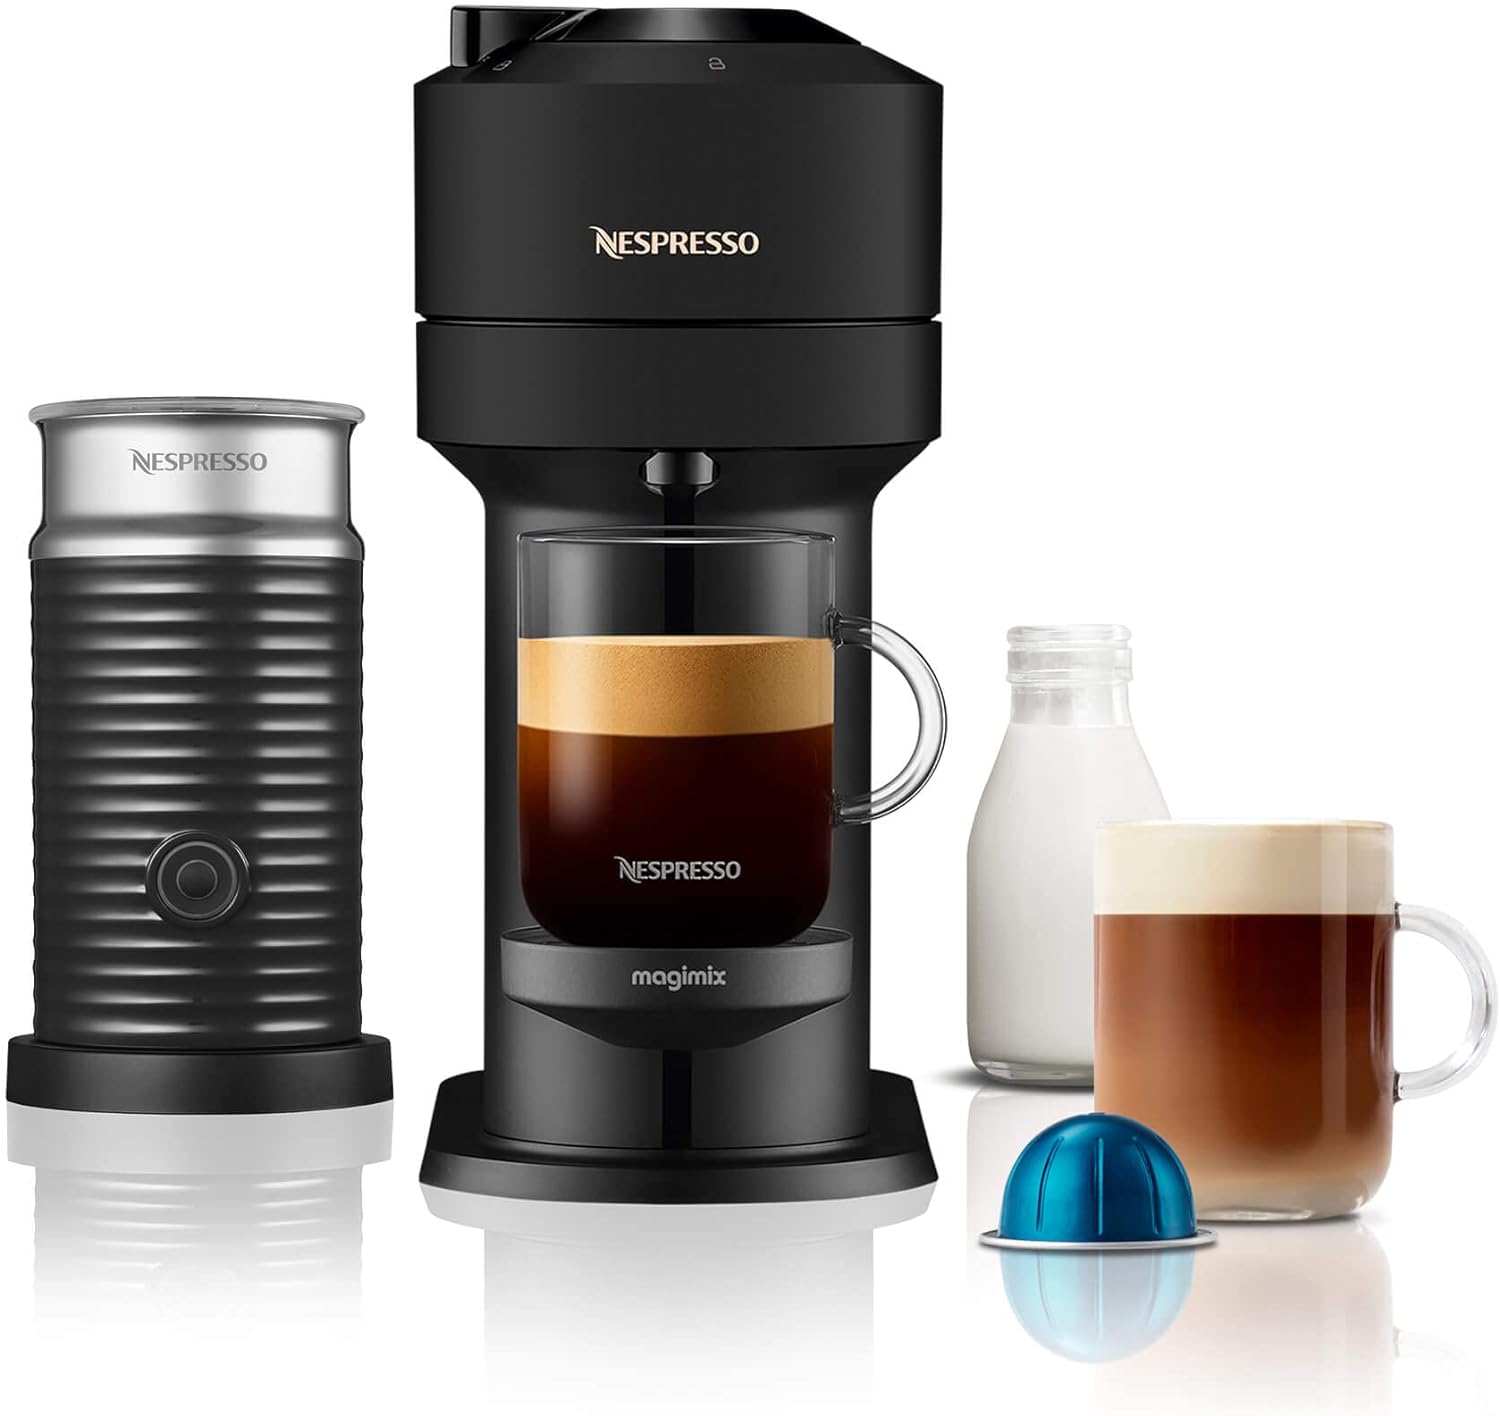 Nespresso Vertuo Next Automatic Pod Coffee Machine with Milk Frother for Espresso, Cappuccino and Latte by Magimix in Matt Black [Amazon Exclusive] - Amazing Gadgets Outlet